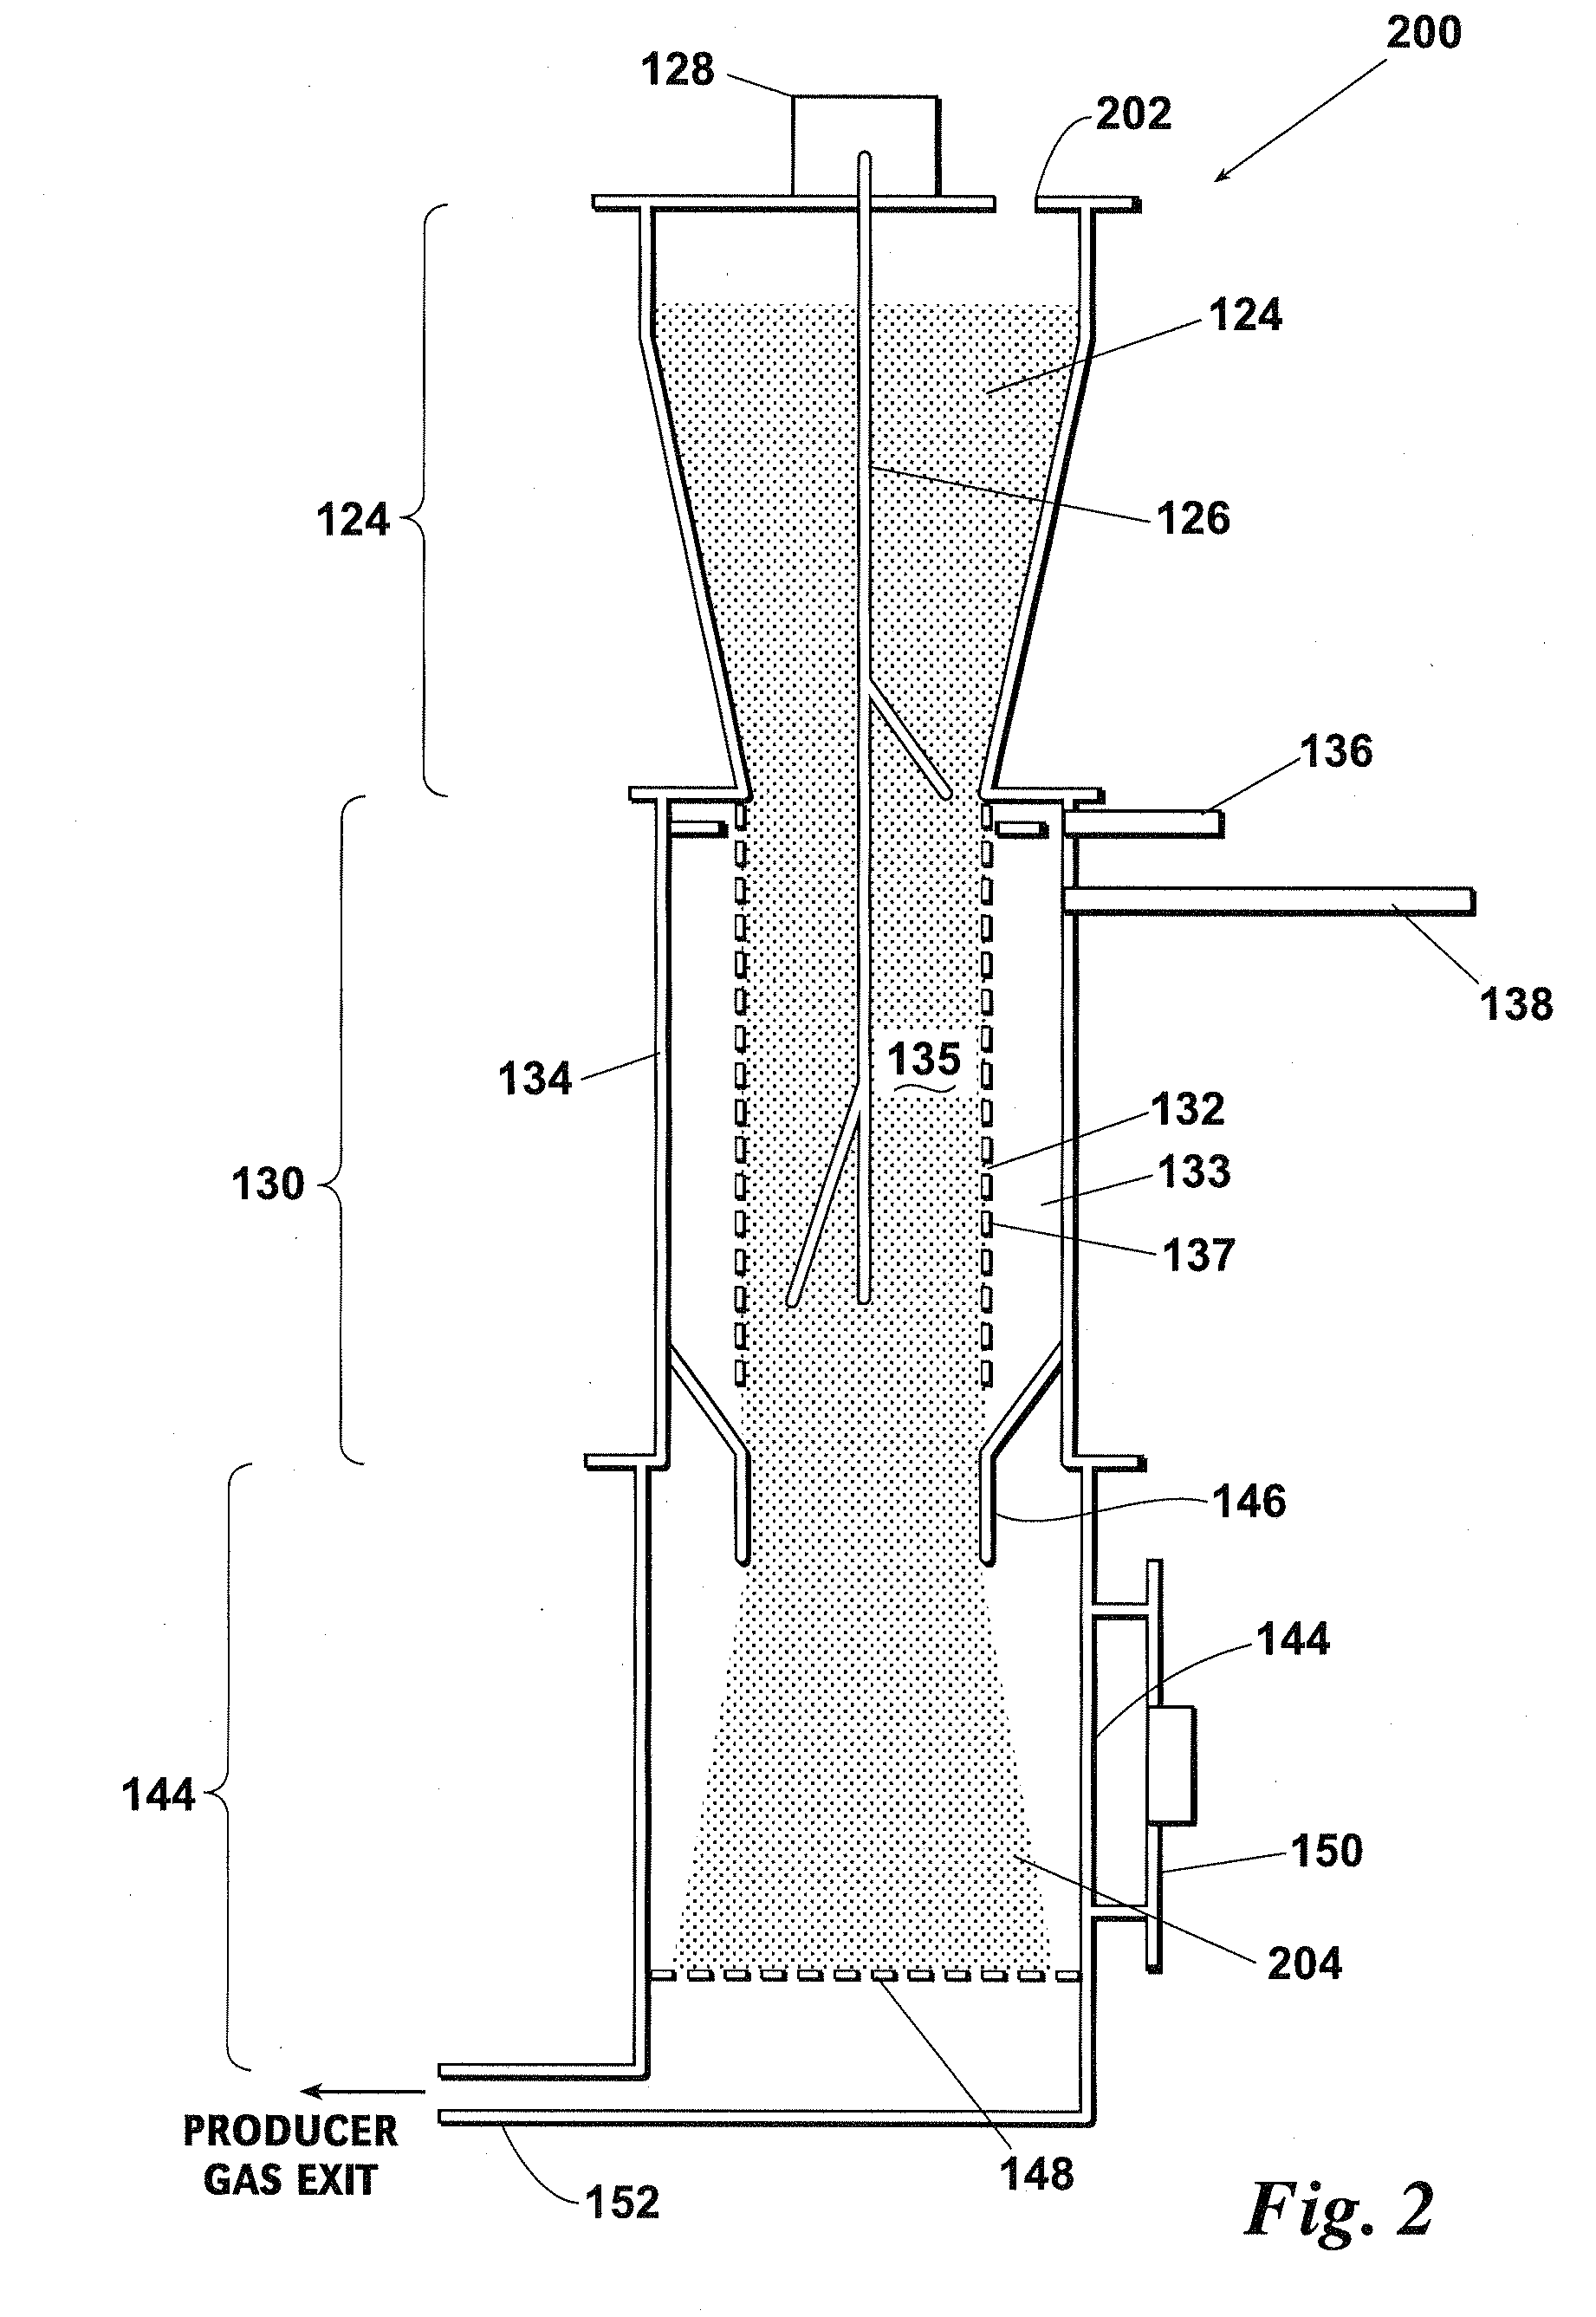 Downdraft gasifier with internal cyclonic combustion chamber